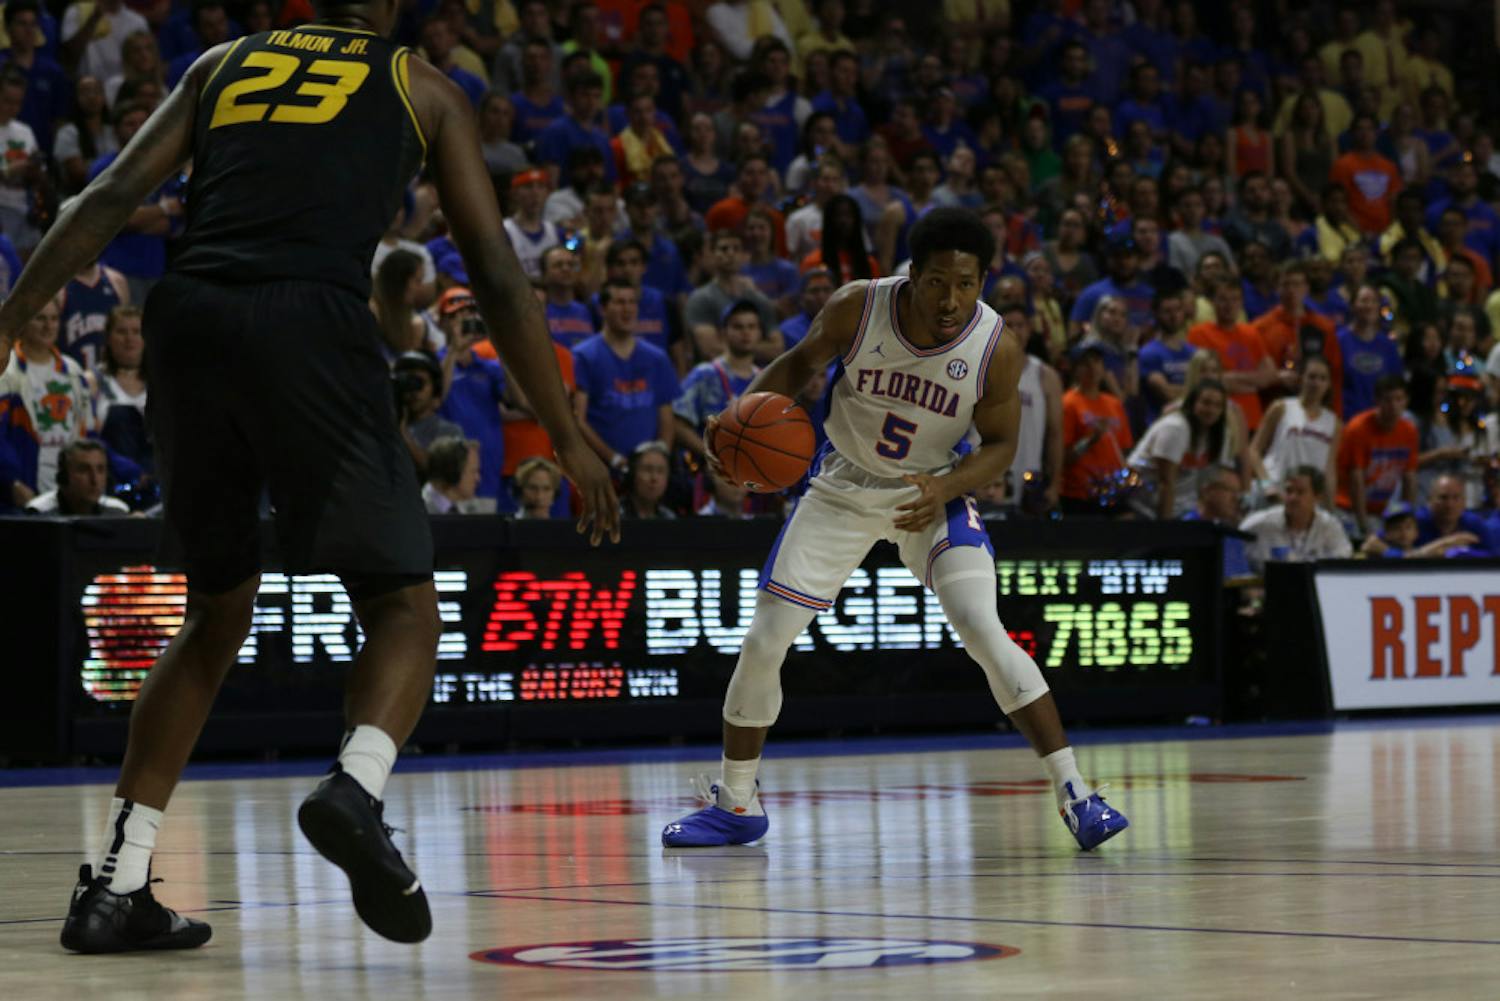 Senior guard KeVaughn Allen has scored in double figures in 22 of the Gators’ 27 games this season, and he has led the team in scoring 11 times.